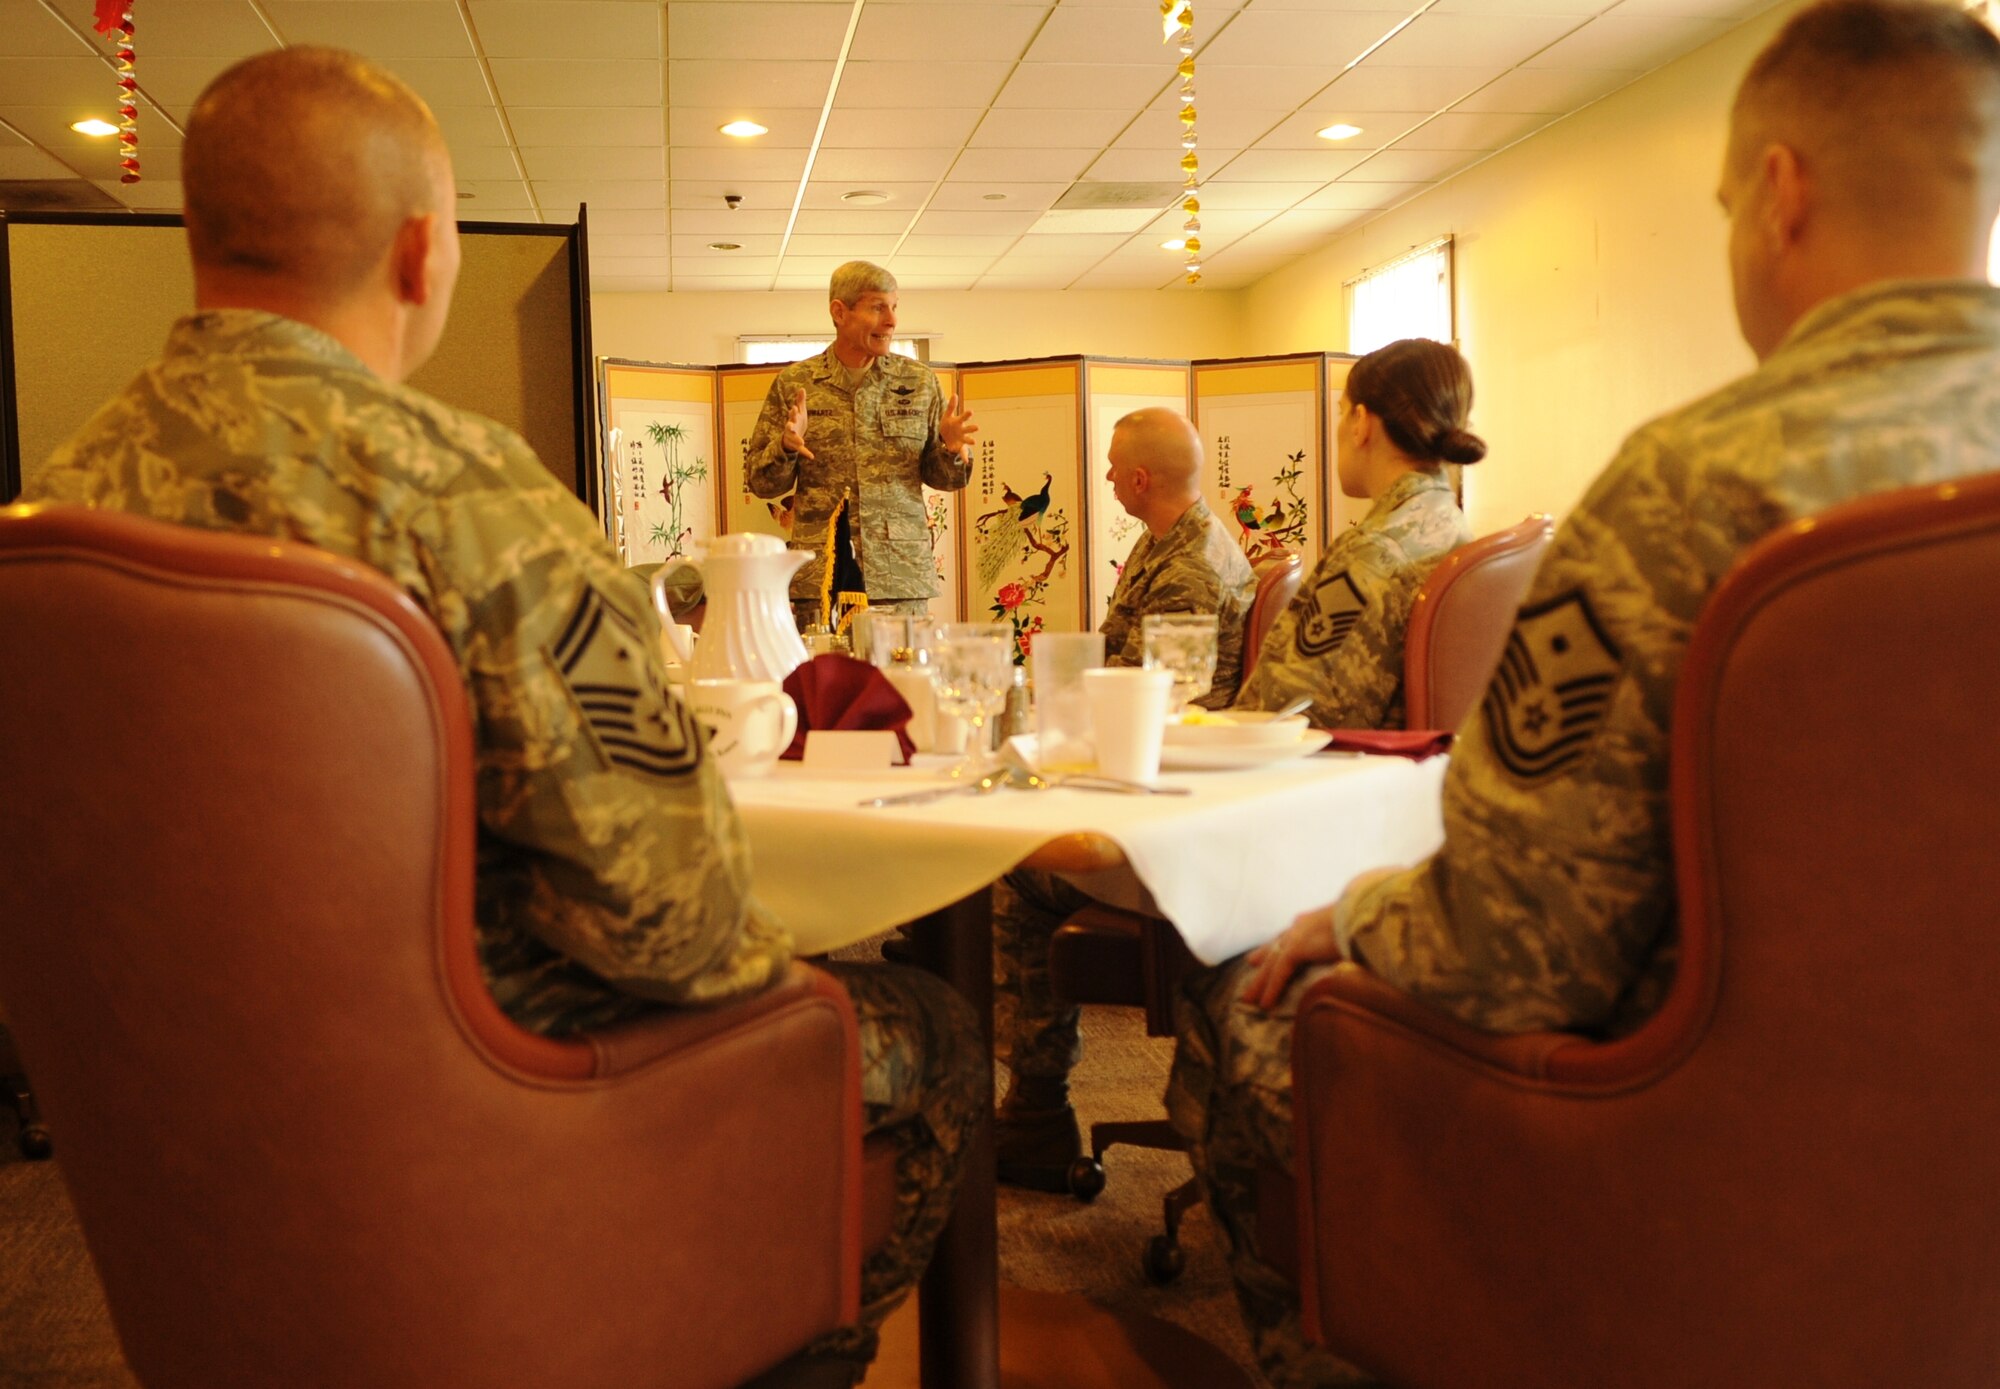 Air Force Chief of Staff Gen. Norton Schwartz talks with 8th Fighter Wing first sergeants during breakfast Dec. 24, 2011, as part of his visit to Kunsan Air Base, South Korea. The general and his wife visited Kunsan AB during the holidays to spend time and spread holiday cheer to Airmen serving on a remote, one-year assignment on the Korean peninsula. (U.S. Air Force photo/Master Sgt. Sonny Cohrs)